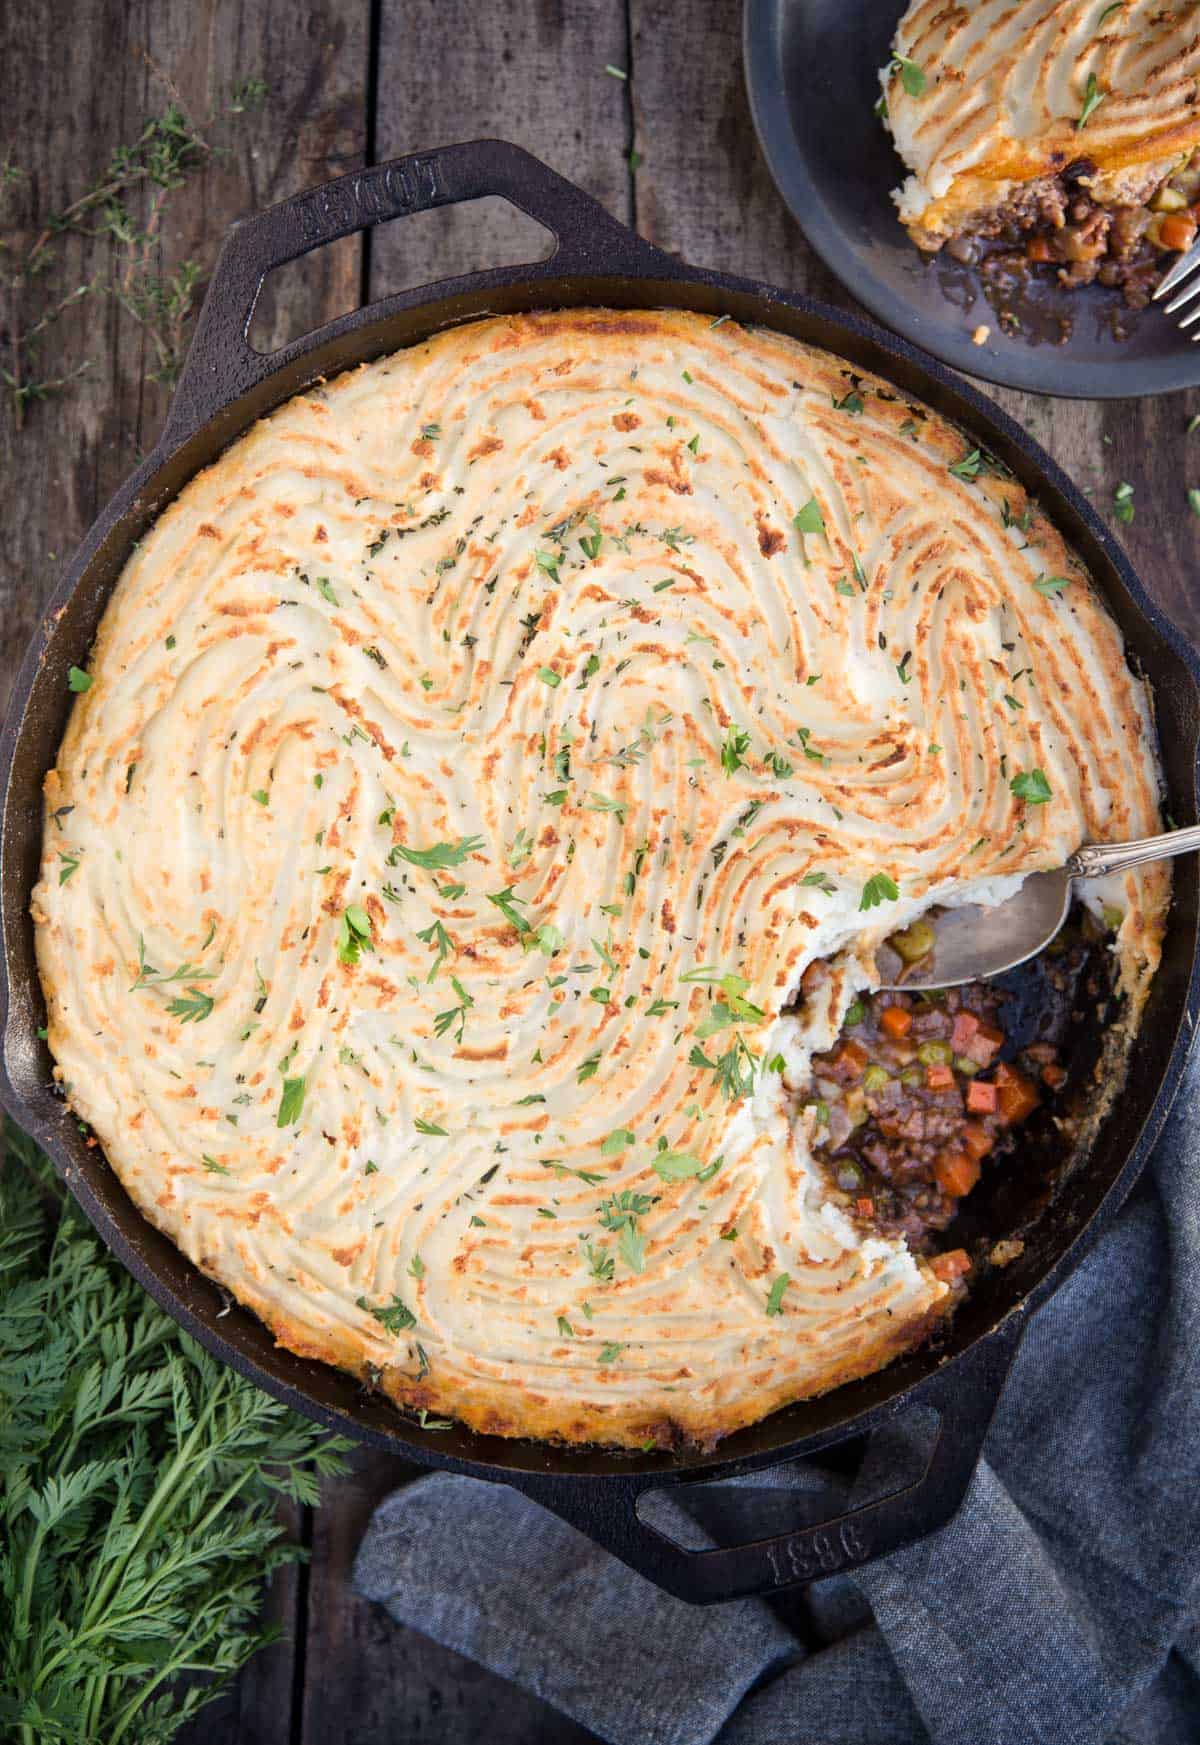 Classic Shepherd's Pie cooked on the Grill